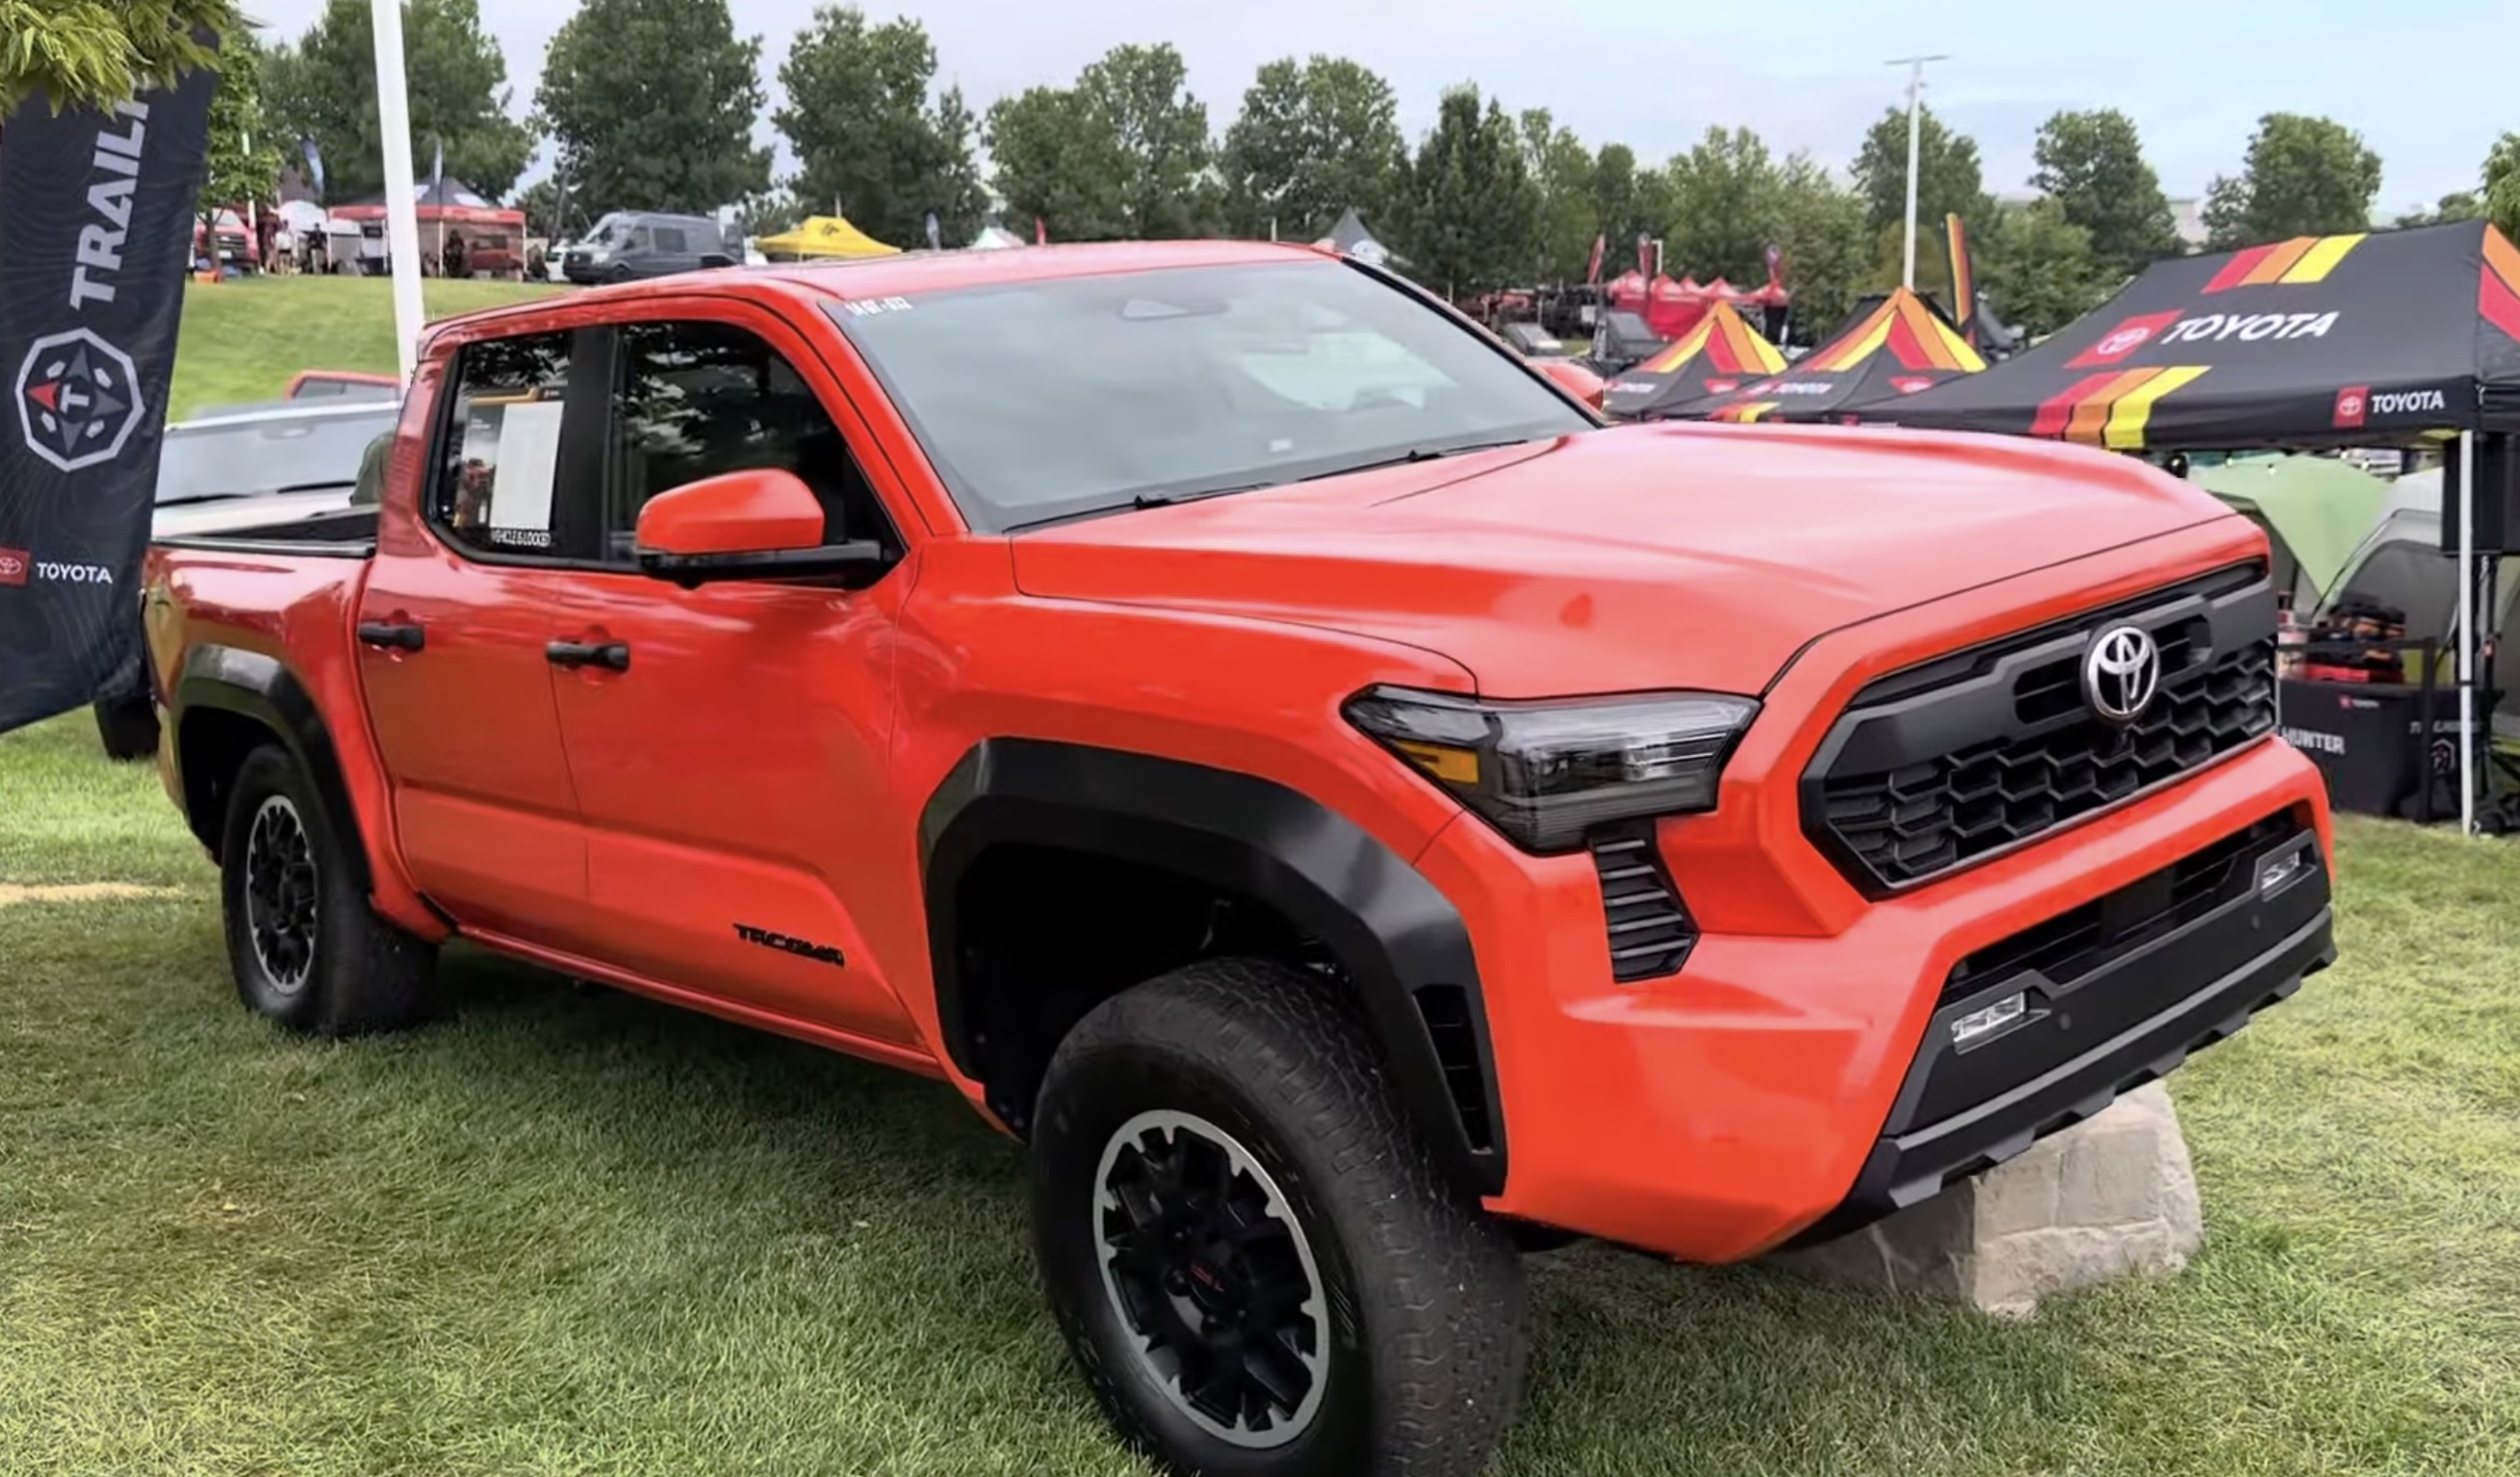 2024 Tacoma 2024 Tacoma TRD Off-Road has first official public reveal @ Overland Expo! [Videos + Photos] solar-octane-2024-tacoma-trd-off-road-2-